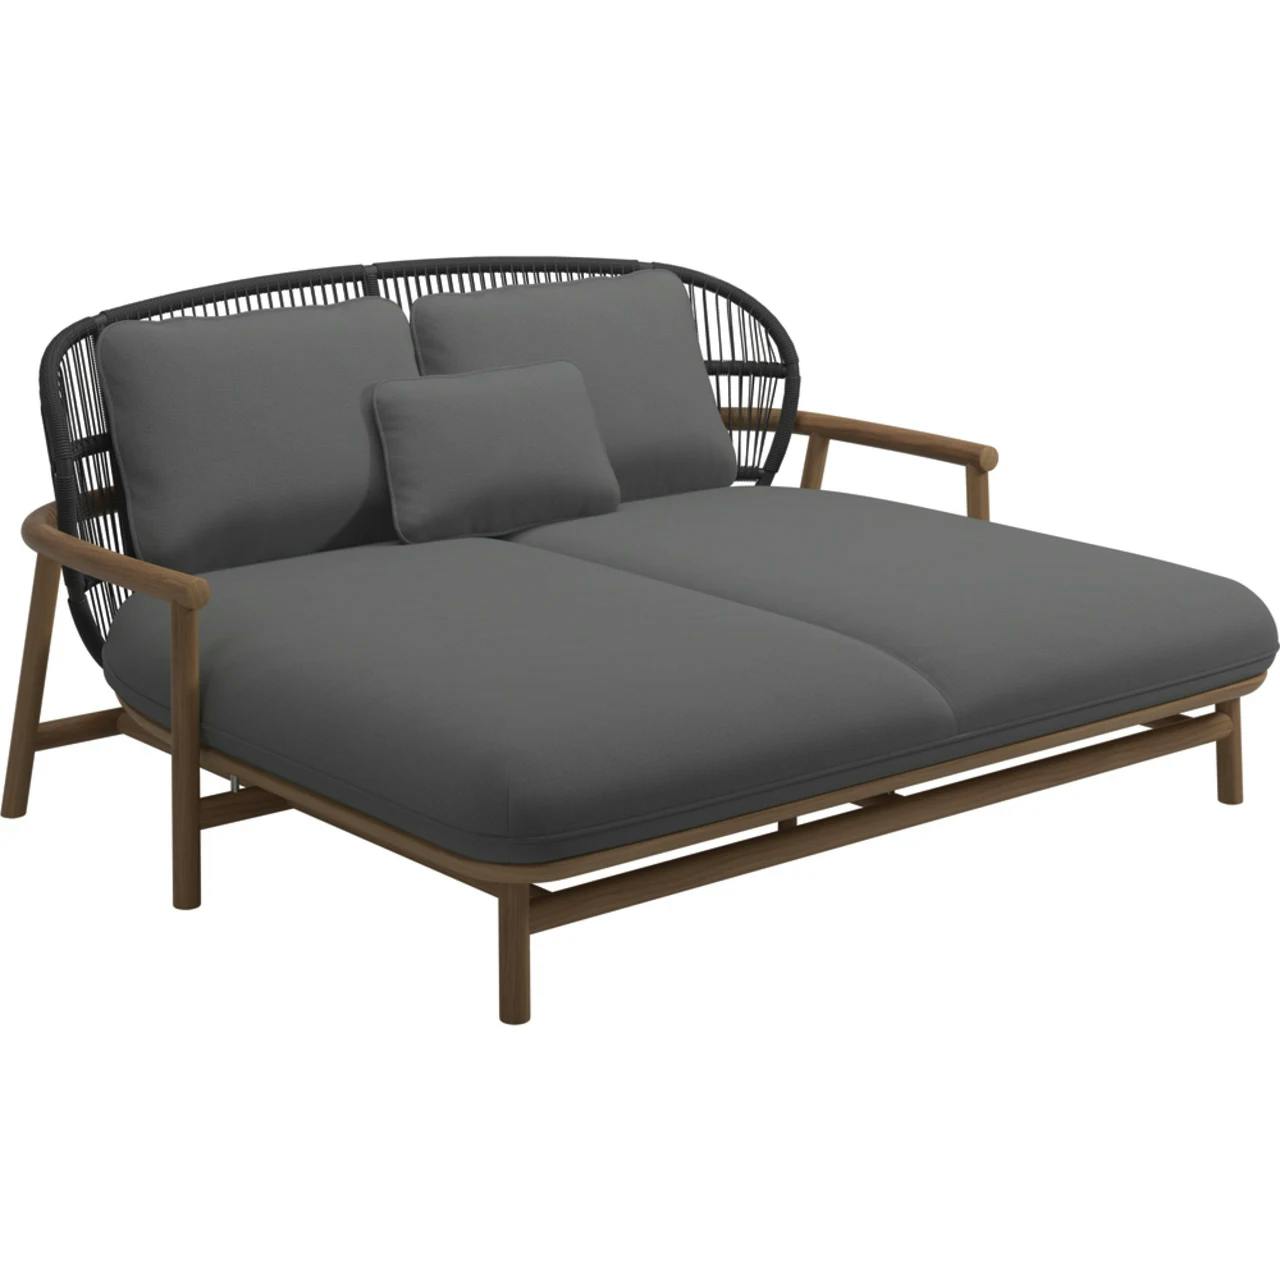 Gloster Fern Low Back Daybed Raven | Essential Granite Cushion Fabric